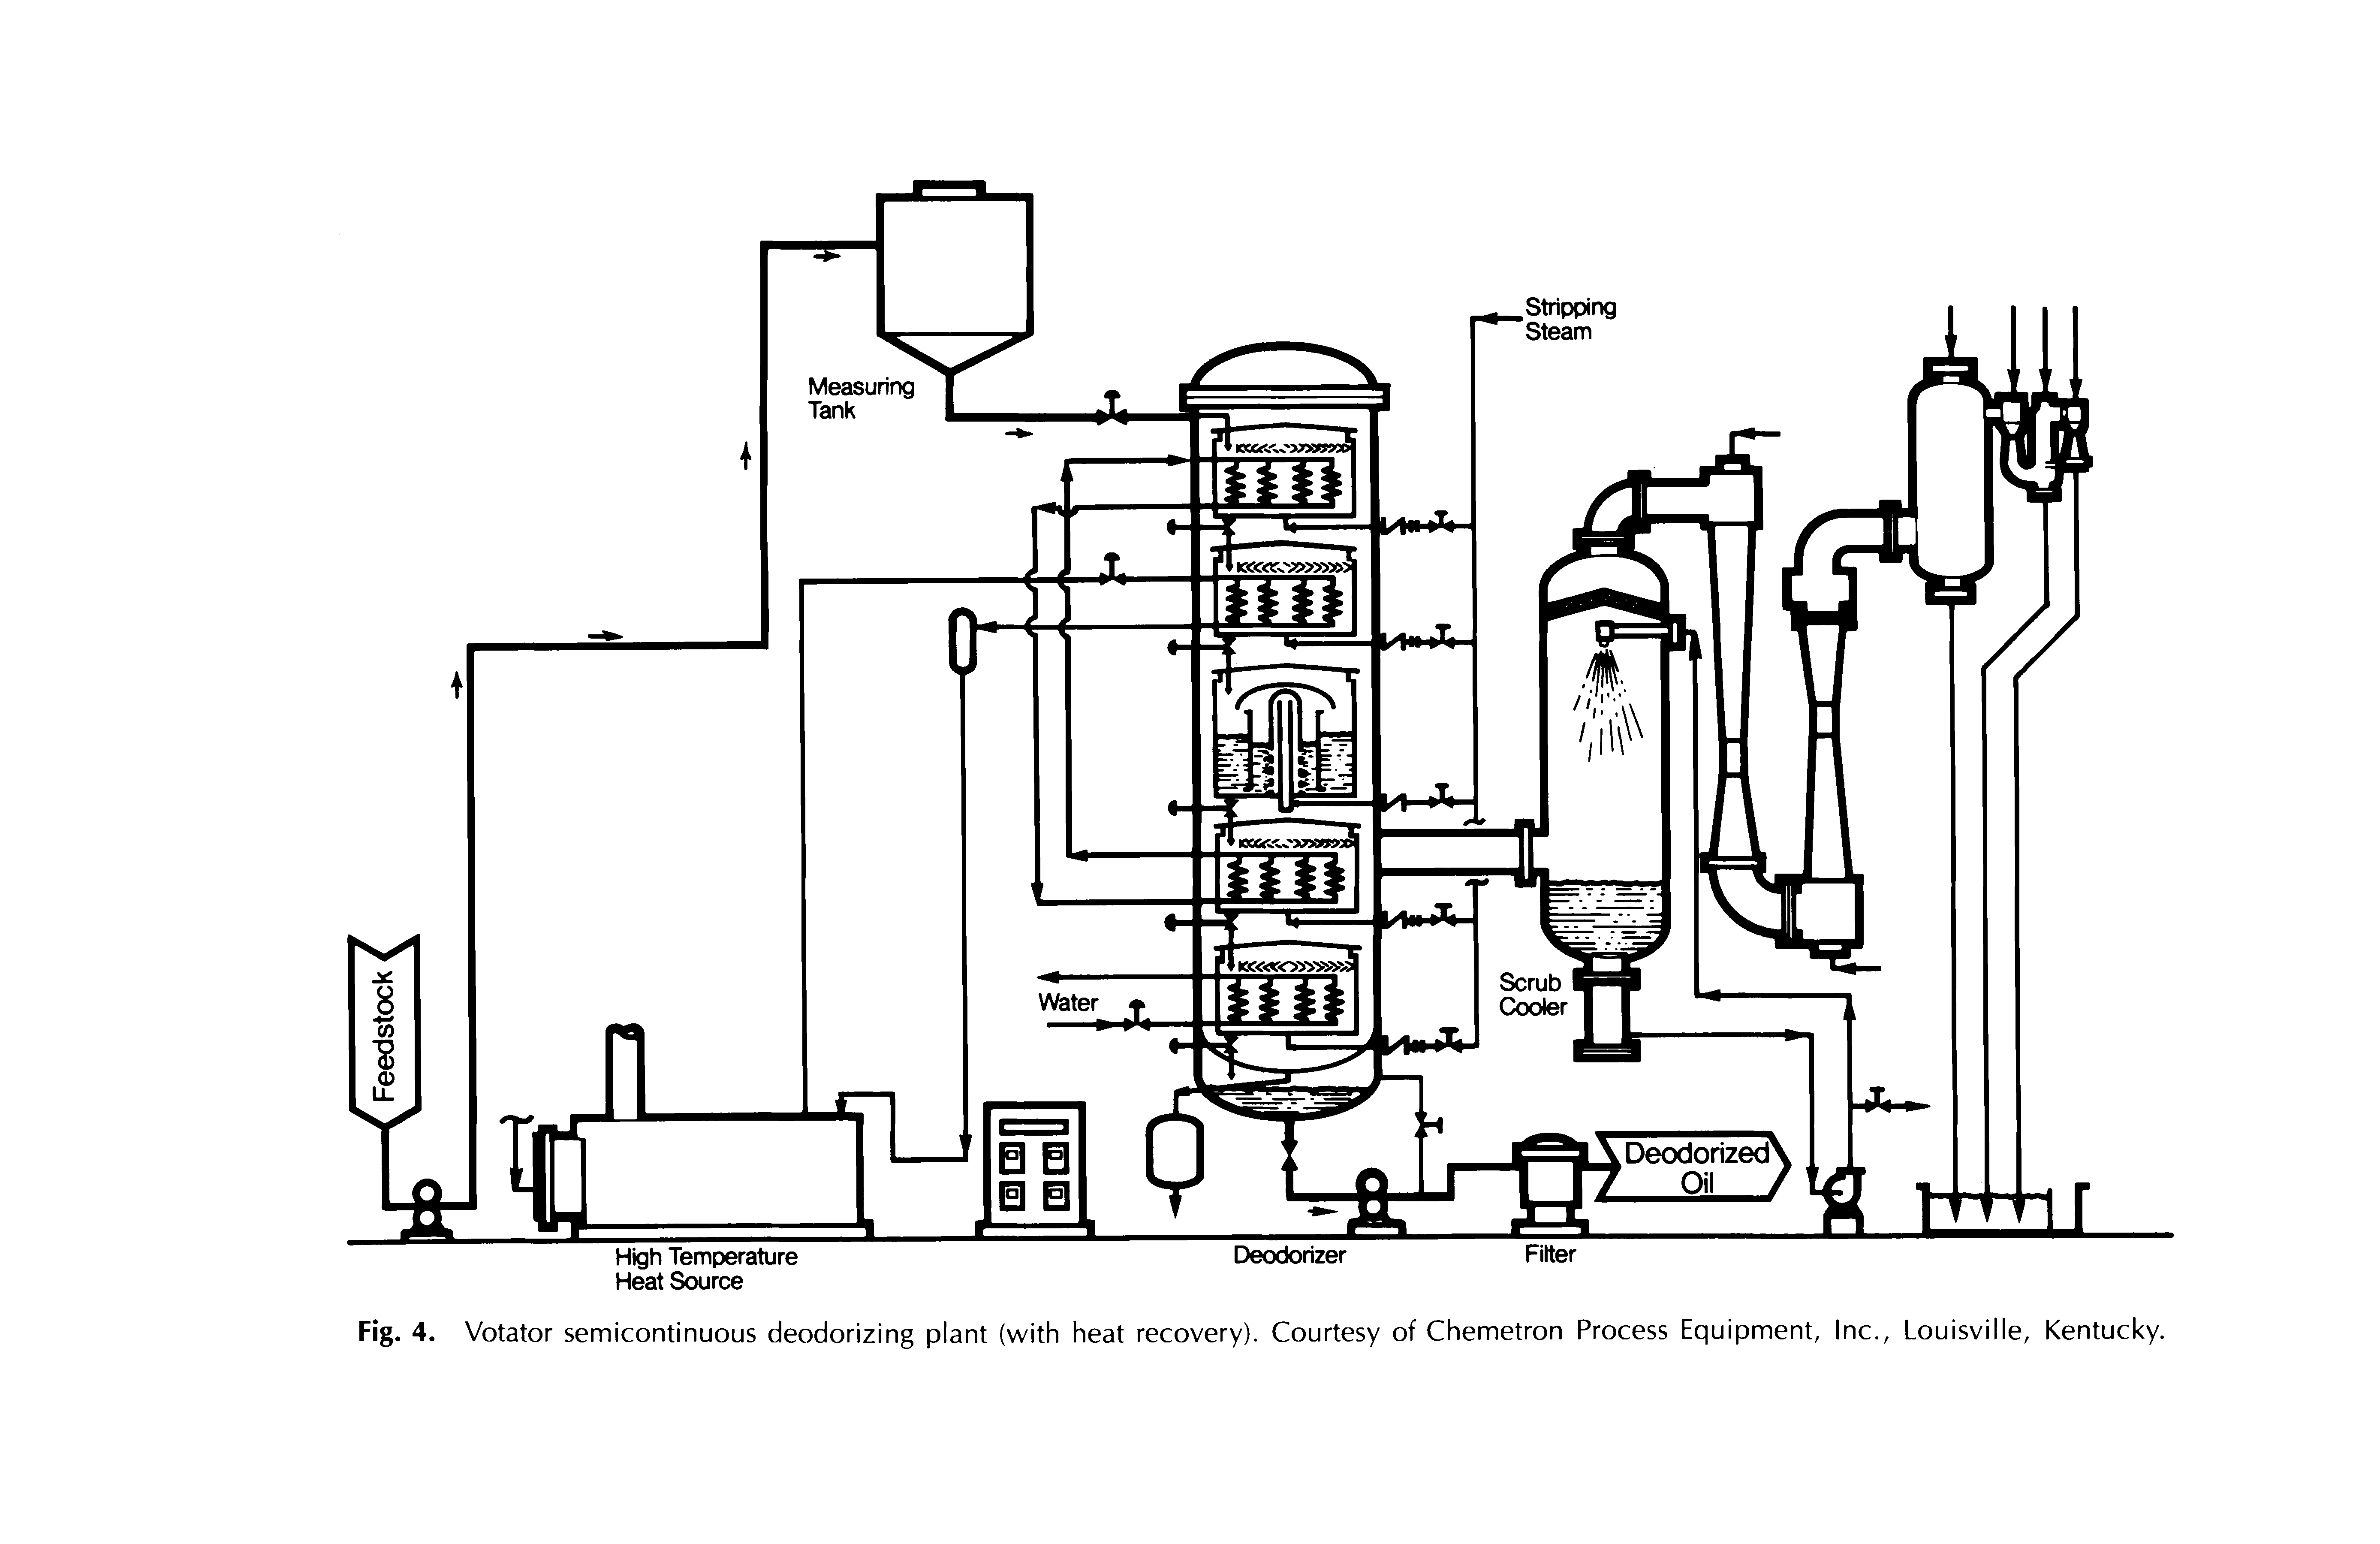 Fig. 4. Votator semicontinuous deodorizing plant (with heat recovery). Courtesy of Chemetron Process Equipment, Inc., Louisville, Kentucky.